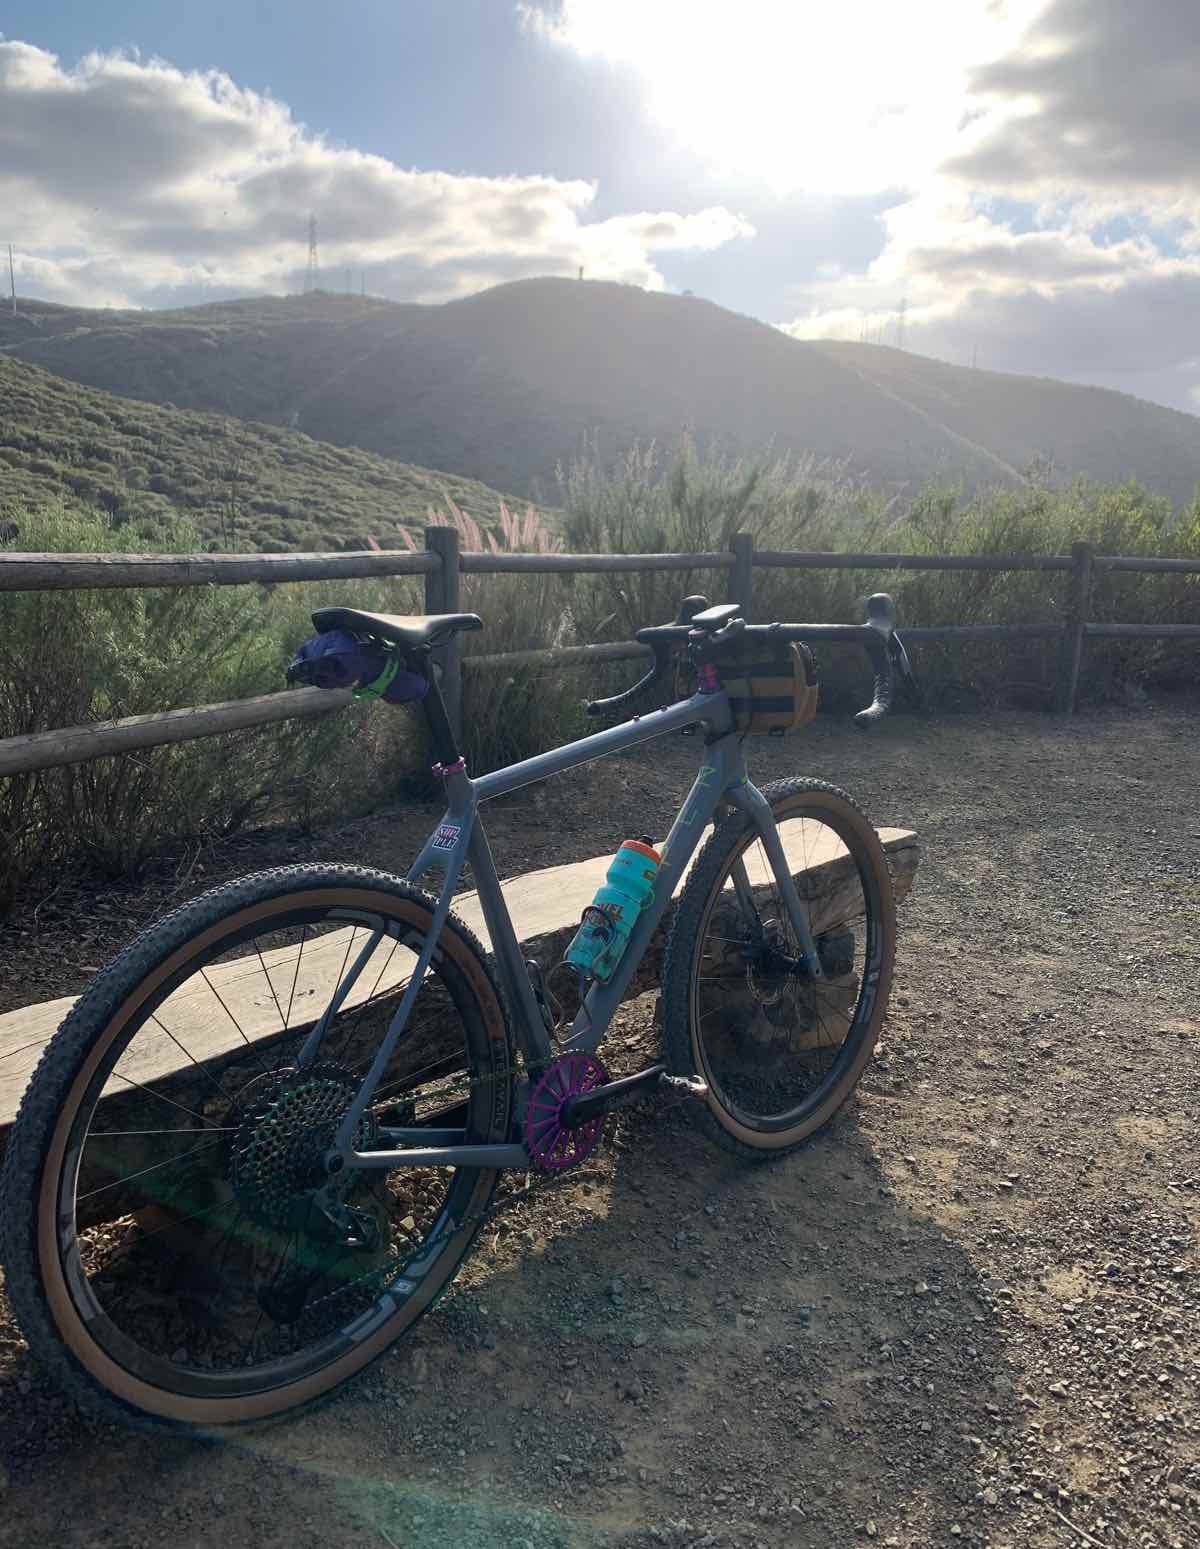 bikerumor pic of the day a mountain bike leans against a bench along a gravel trail that is enclosed with a wood railing, beyond is a green hillside with the sun peeking out through the clouds towards the viewer, it is the bright hour of the day before the sun sets.